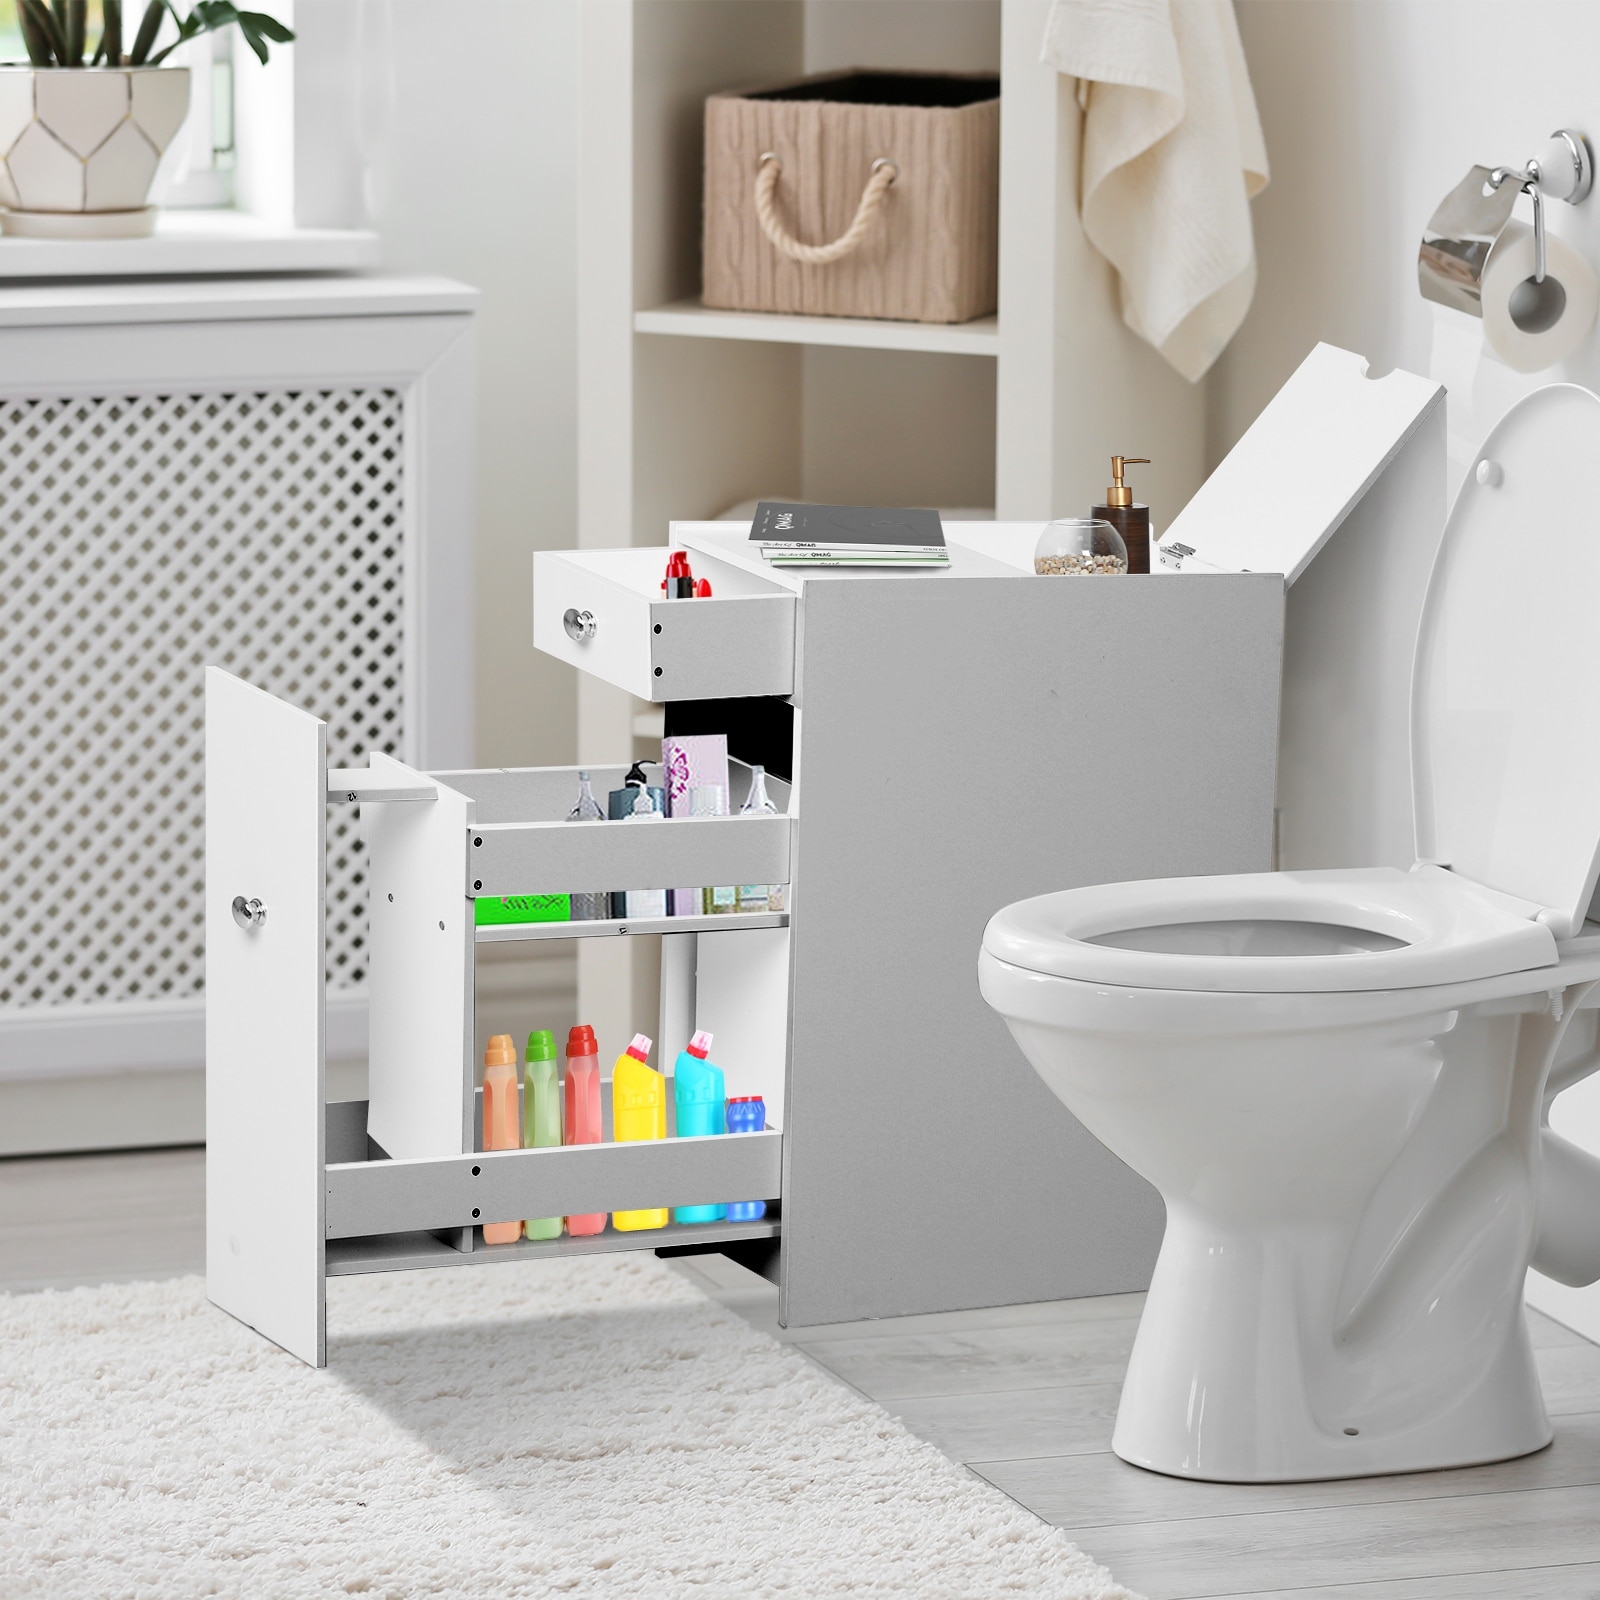 https://ak1.ostkcdn.com/images/products/is/images/direct/7777e1ae012e968be6ff72a50f4d90a5d3d2dc1a/HOMCOM-Bathroom-Floor-Organizer-Free-Standing-Space-Saving-Narrow-Storage-Cabinet-Bath-Toilet-Paper-Holder-with-Drawers-White.jpg